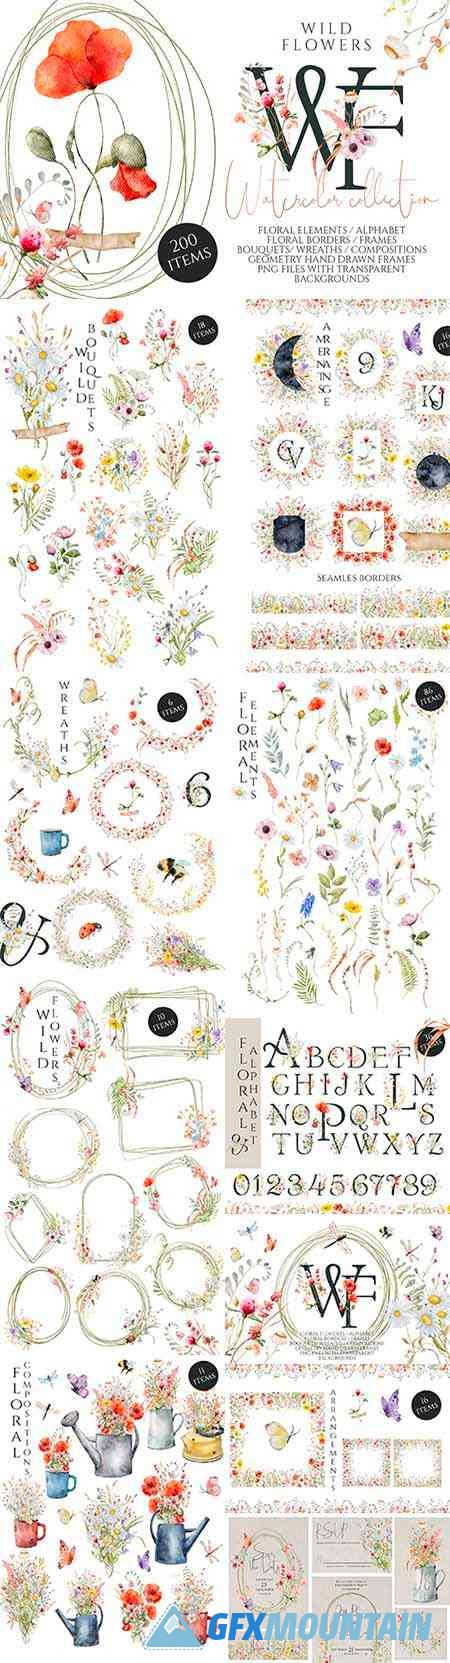 Wild Flowers watercolor collection - 7113962